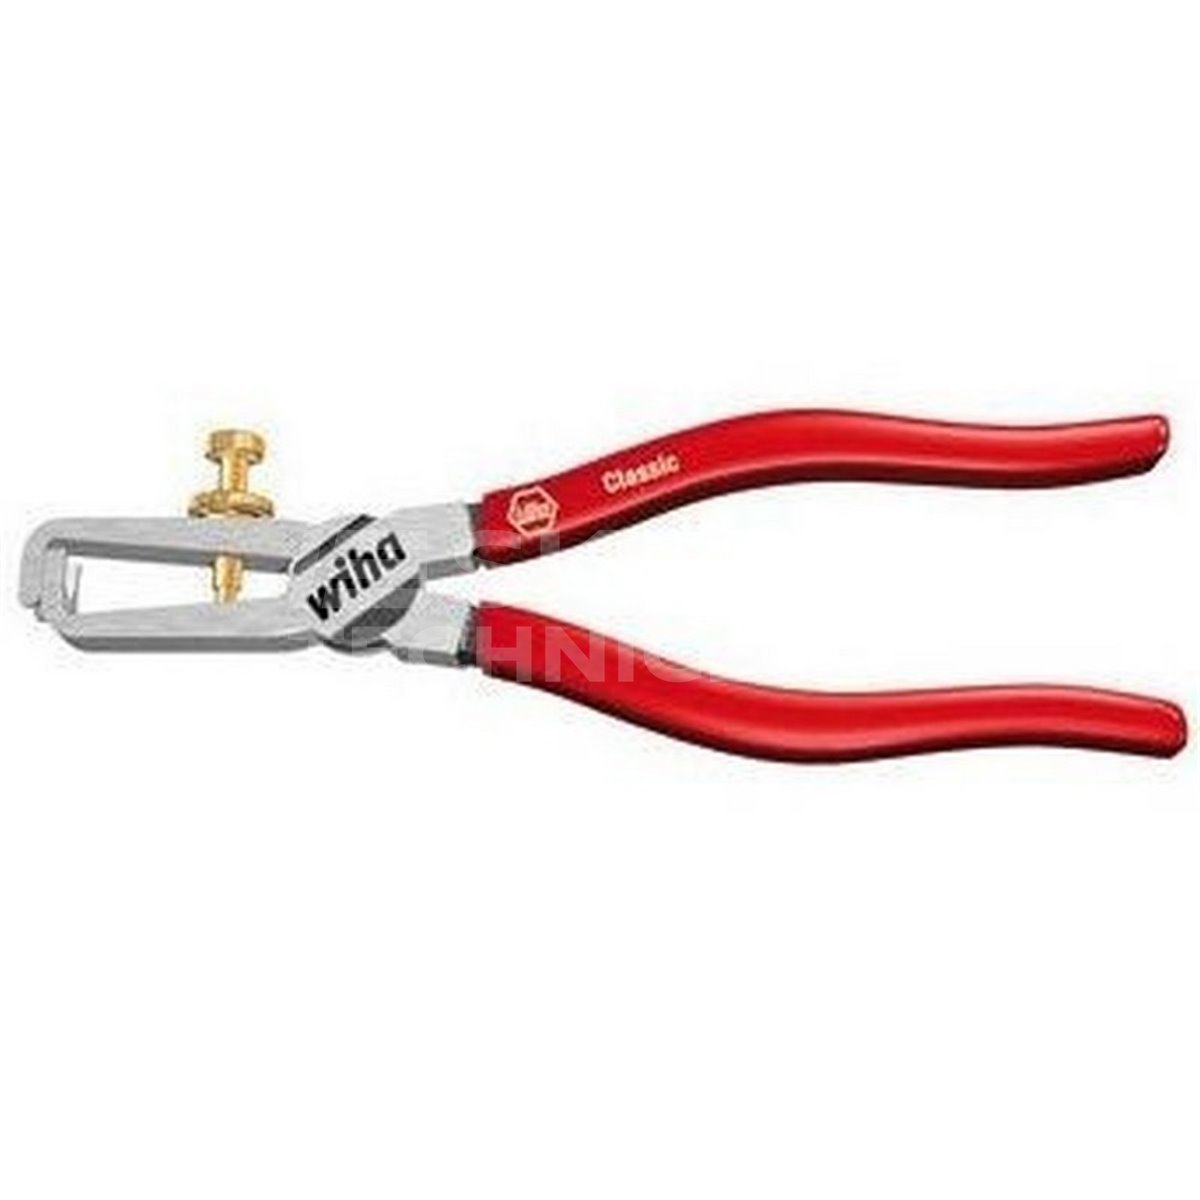 Classic Z55001 160mm insulation pliers in Wiha 27368 blister pack.